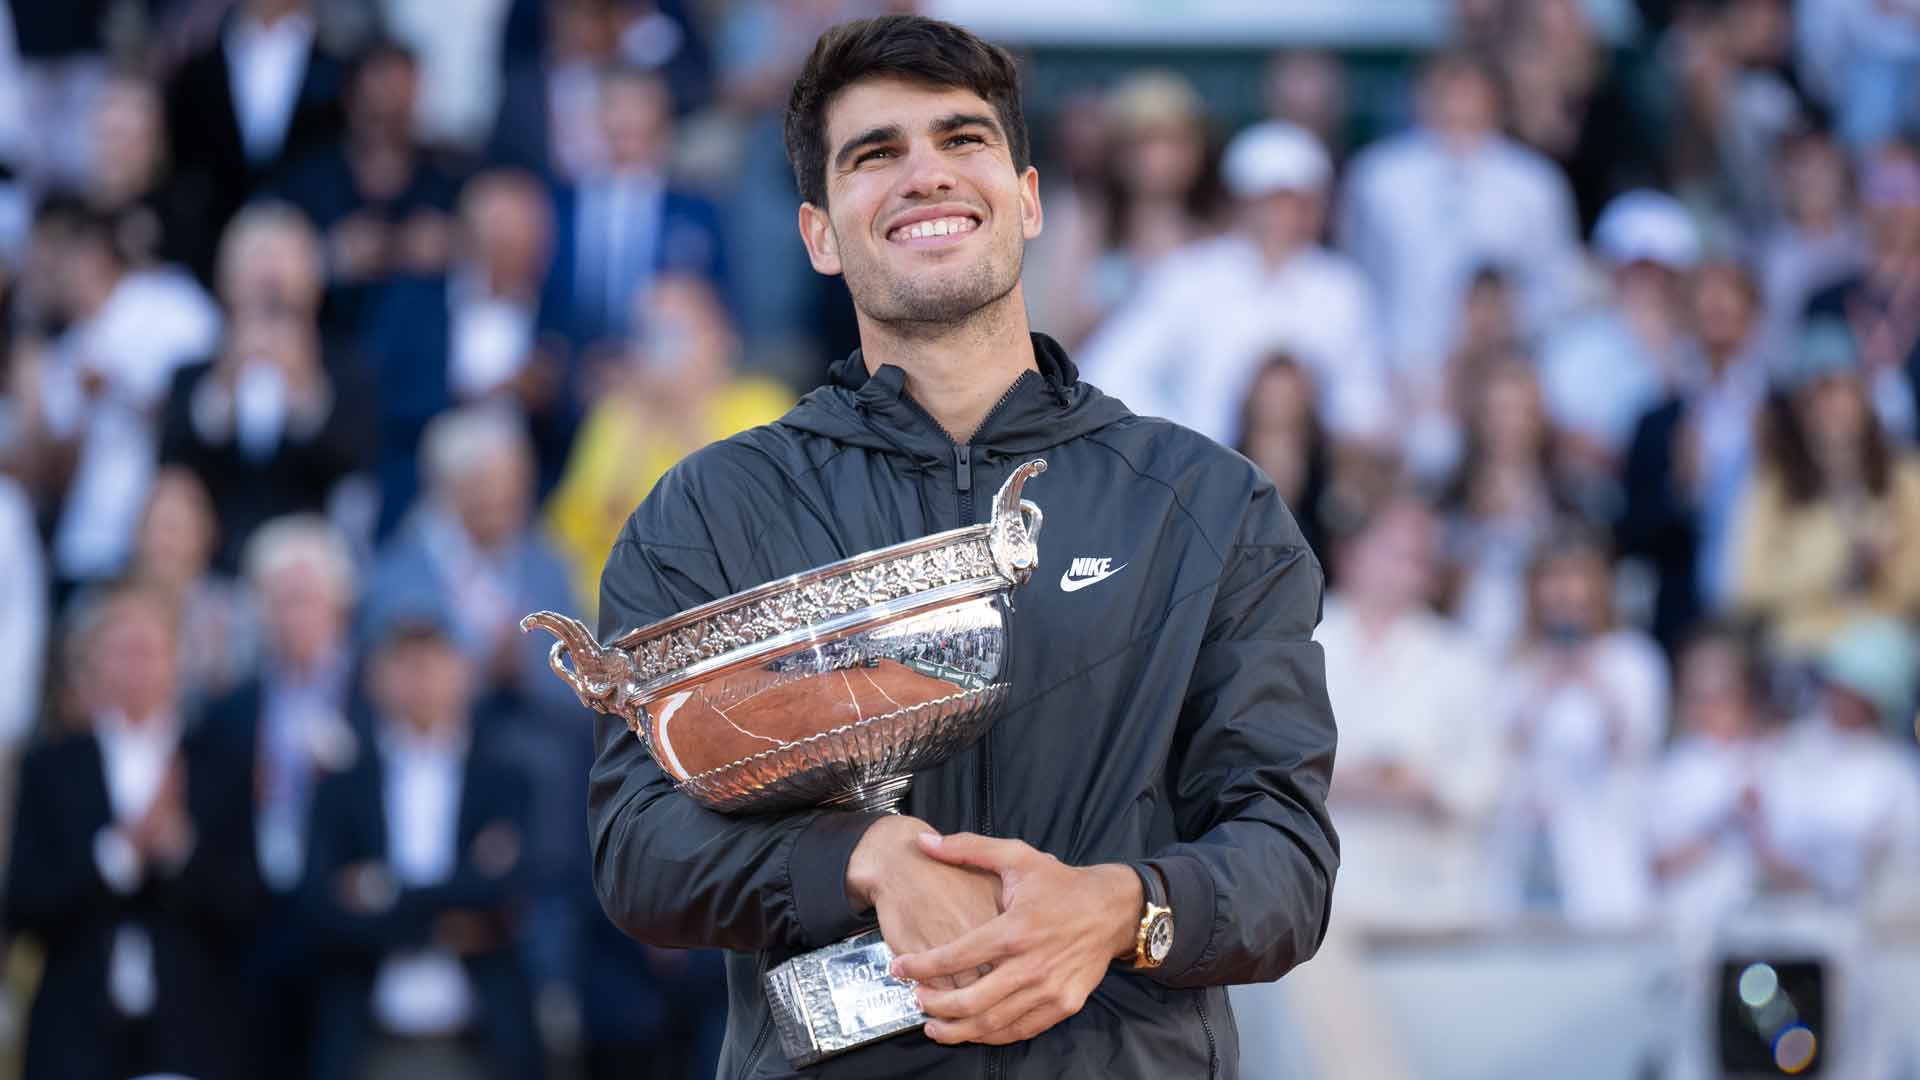 Carlos Alcaraz claims the Coupe des Mousquetaires for the first time after defeating Alexander Zverev on Sunday in the Roland Garros final.